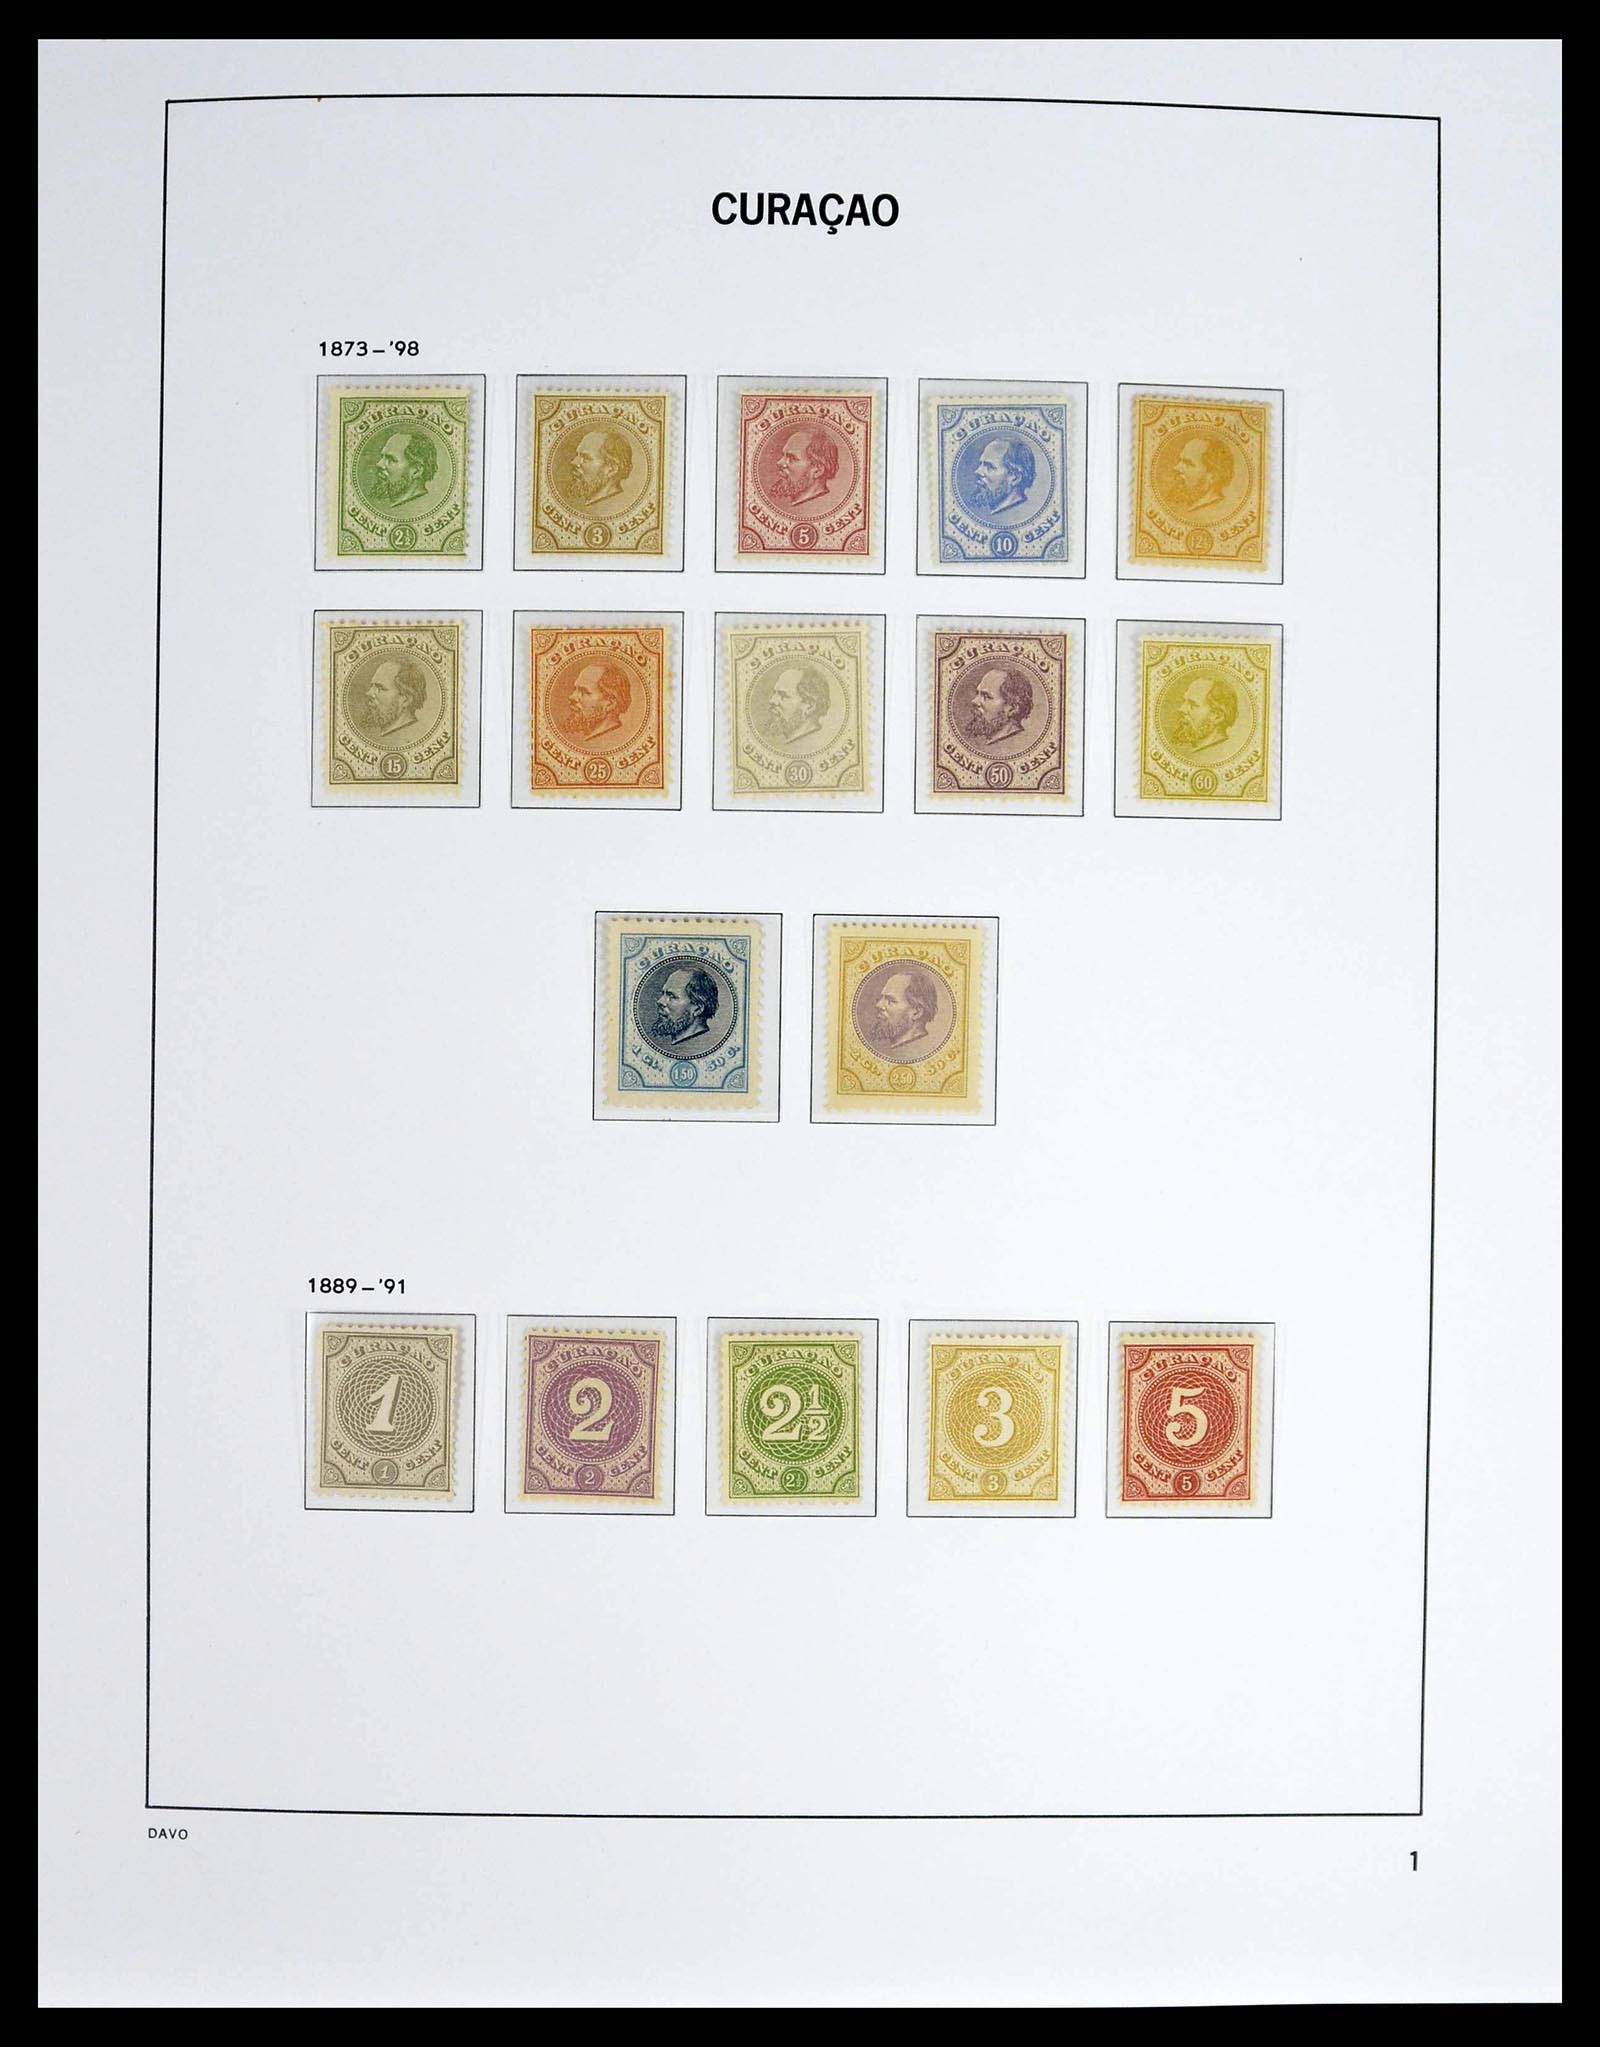 39360 0001 - Stamp collection 39360 Curaçao/Antilles complete 1873-2013.